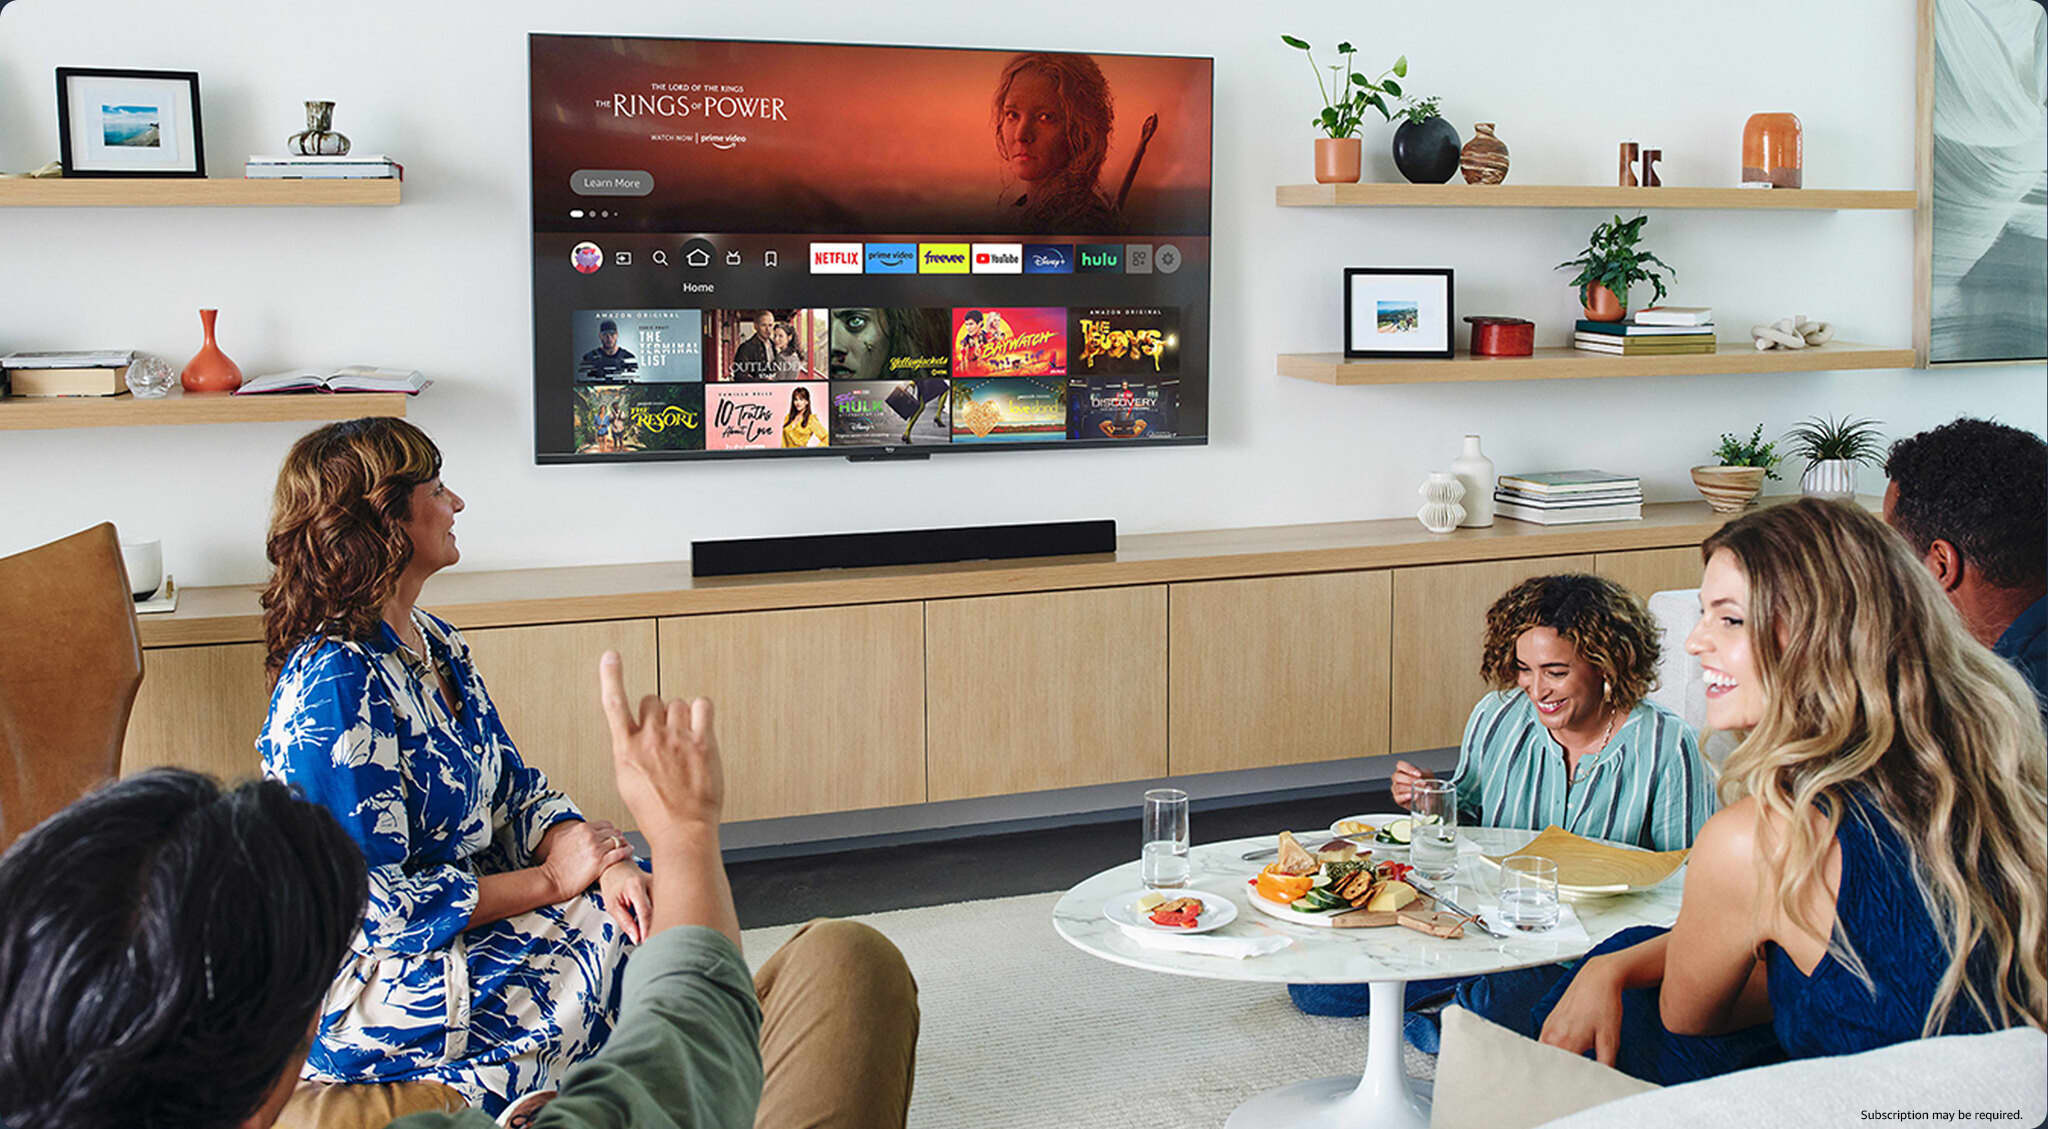 Family and friends browsing shows on a Smart TV